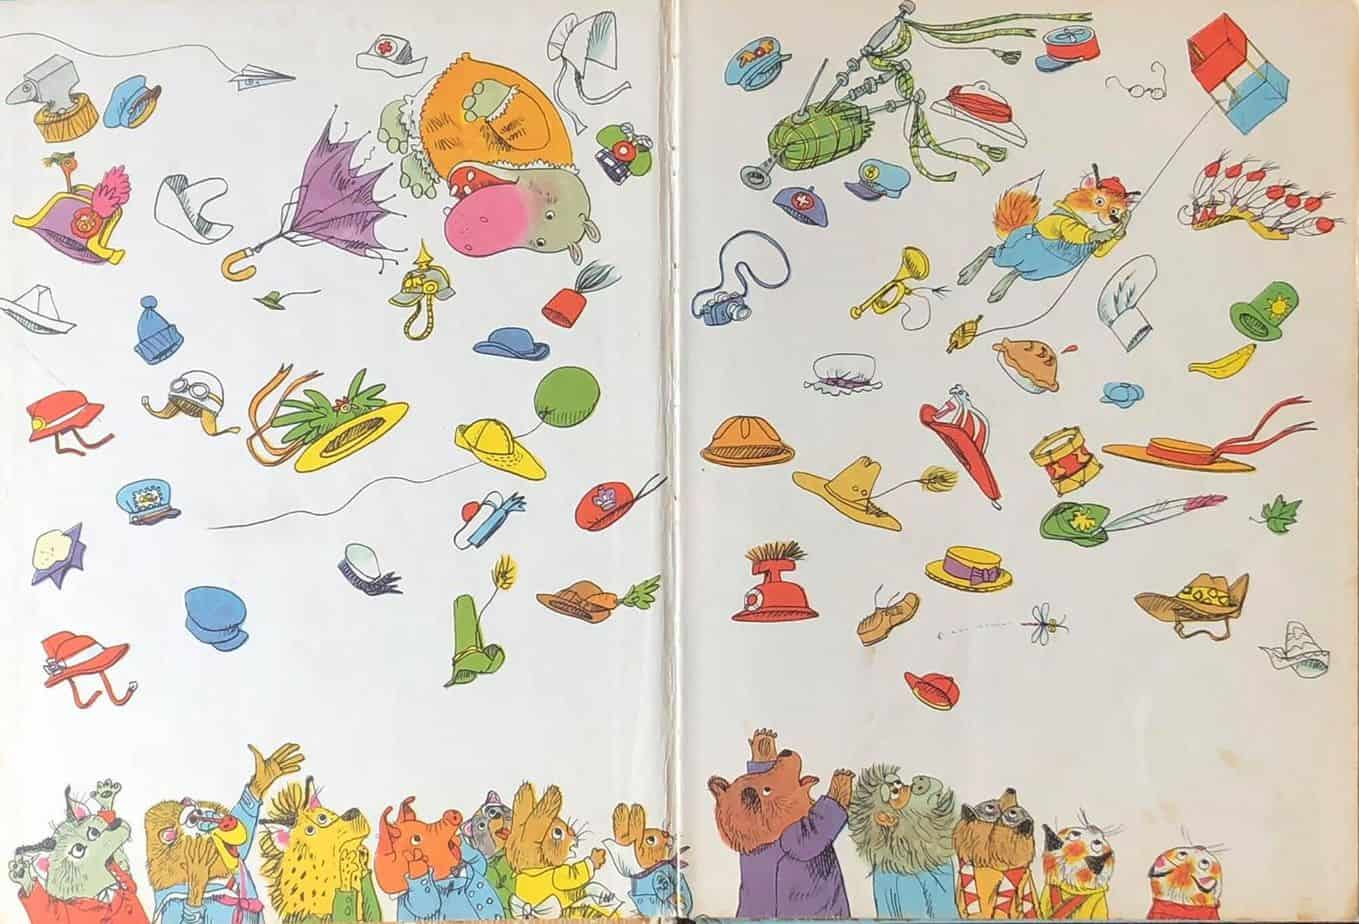 endpapers from Richard Scarry’s Great Big Air Book, 1971